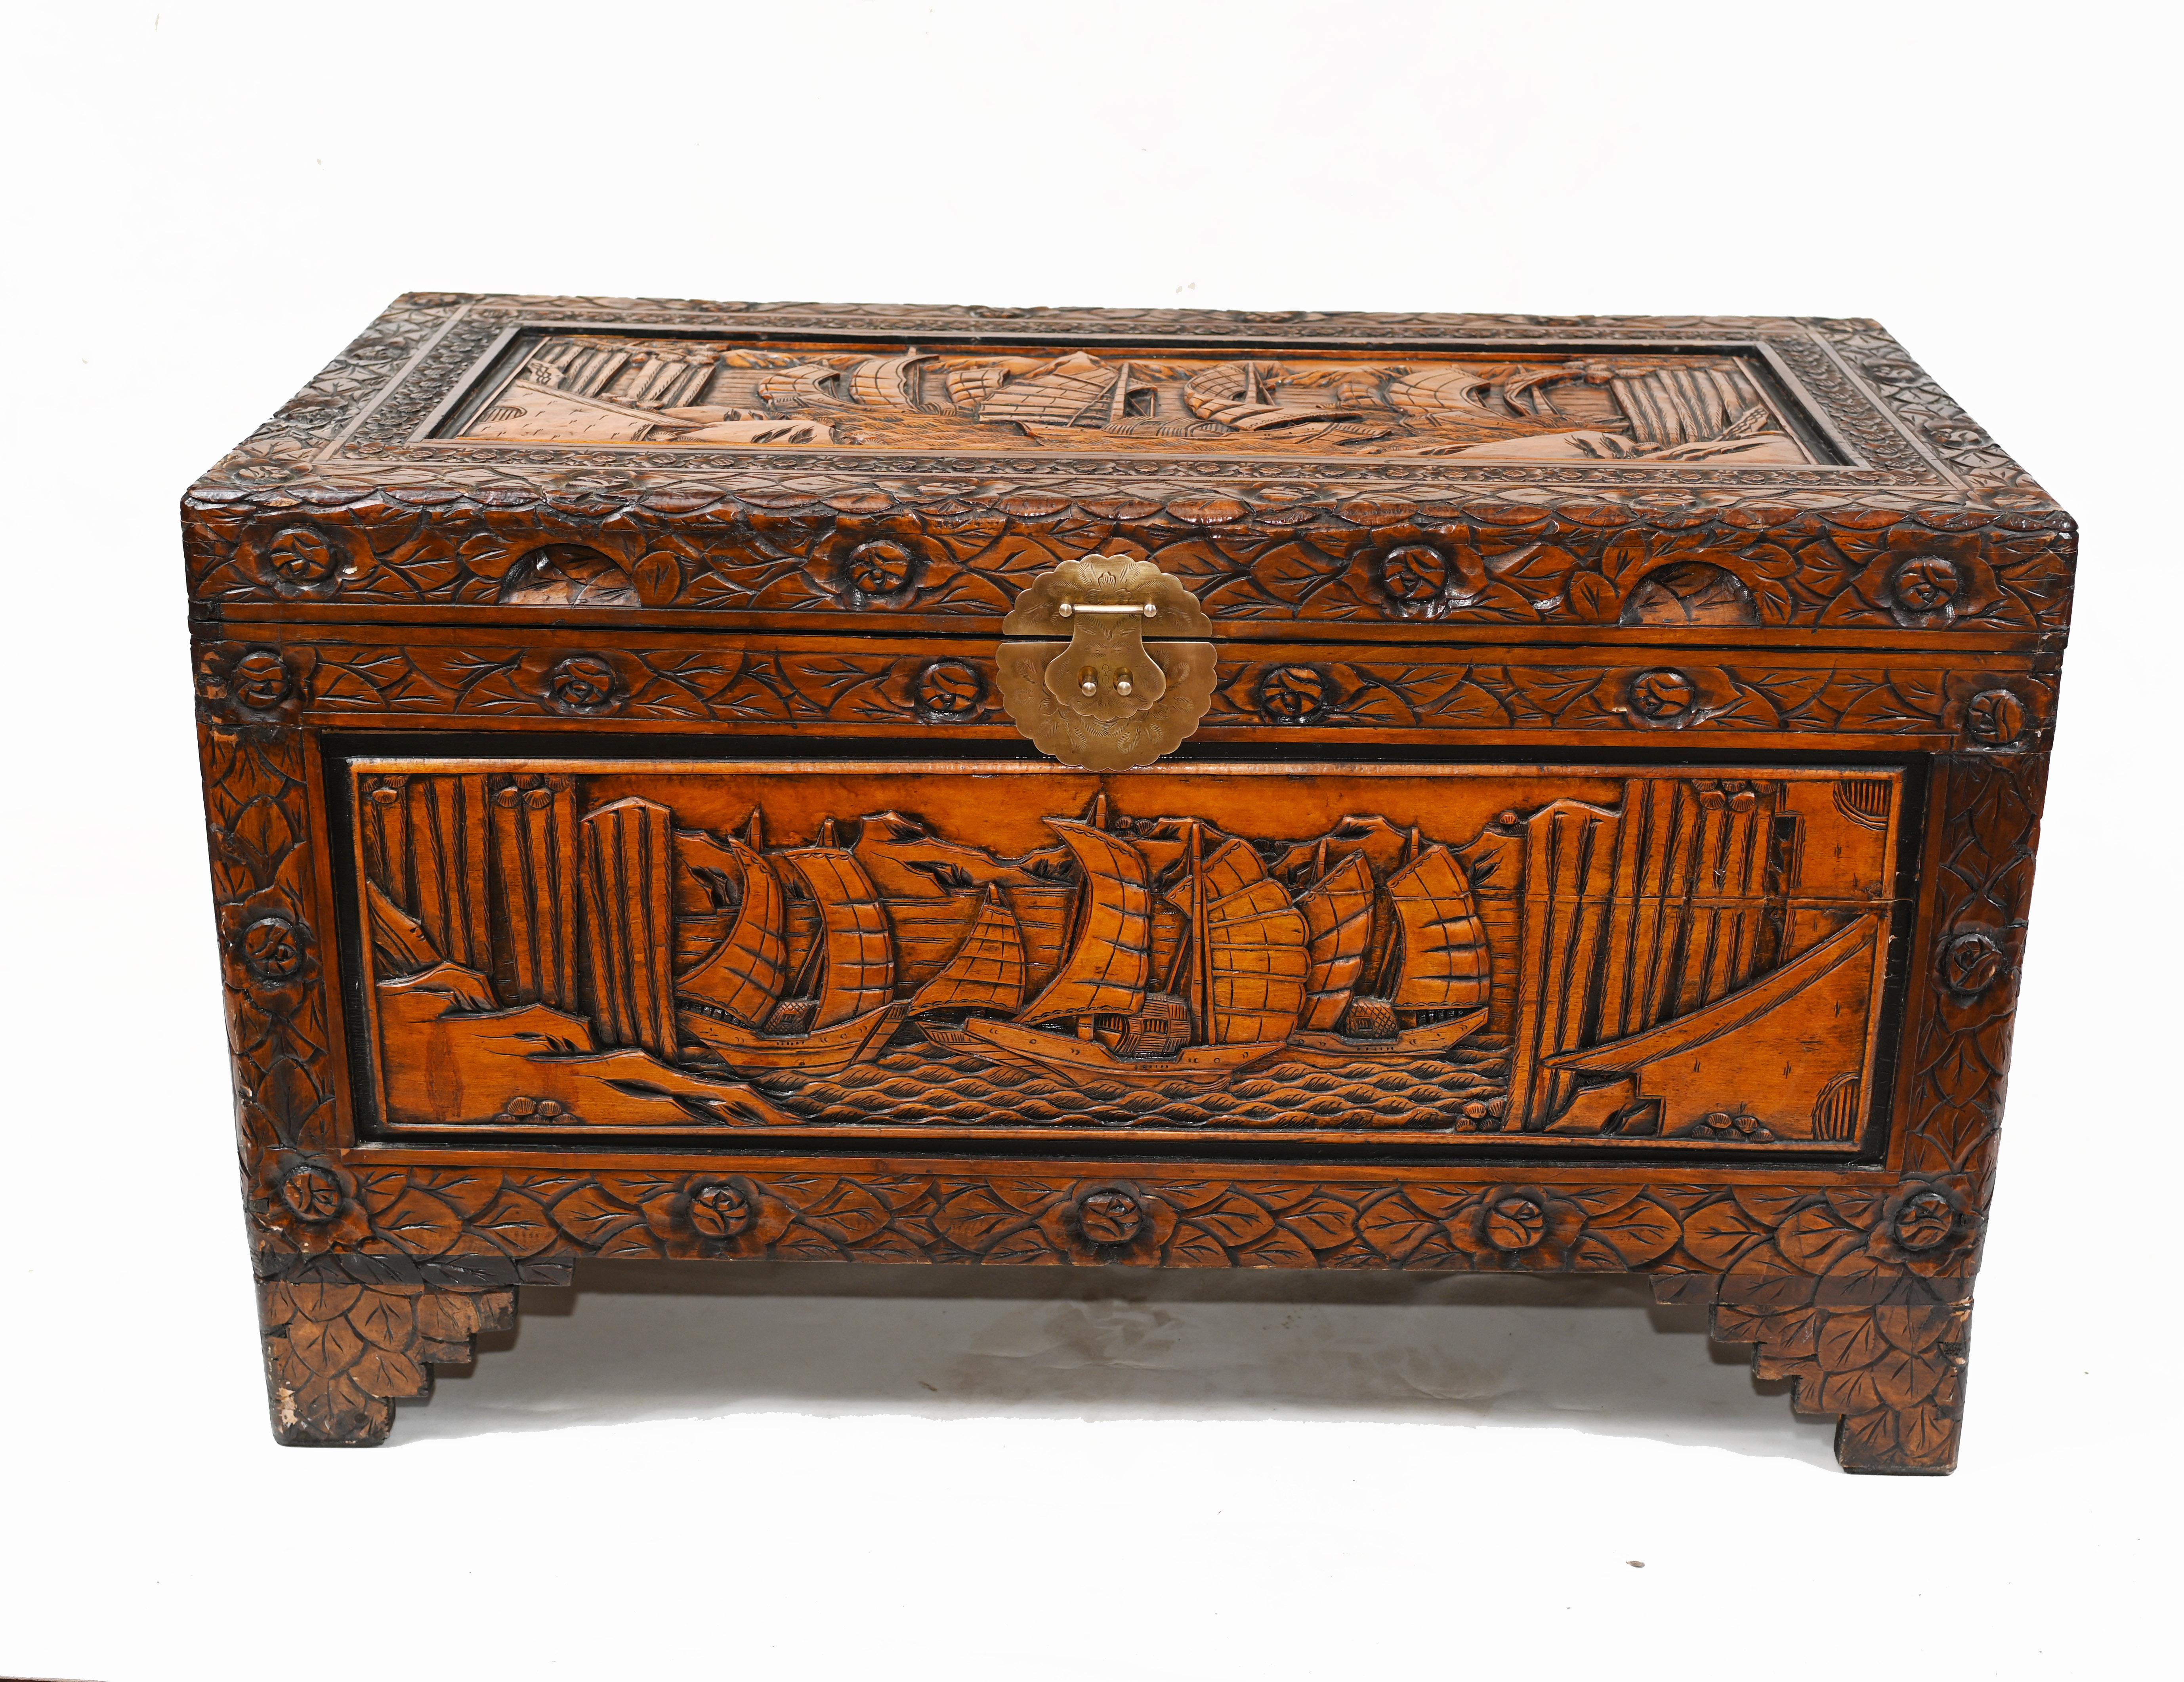 Gorgeous Chinese carved chest crafted from camphor wood
Very detailed carving showing Chinese junk sail boats
Opens out to reveal lots of storage
Great interiors piece and highly collectable
Can also function as a coffee table
Most of these Chinese